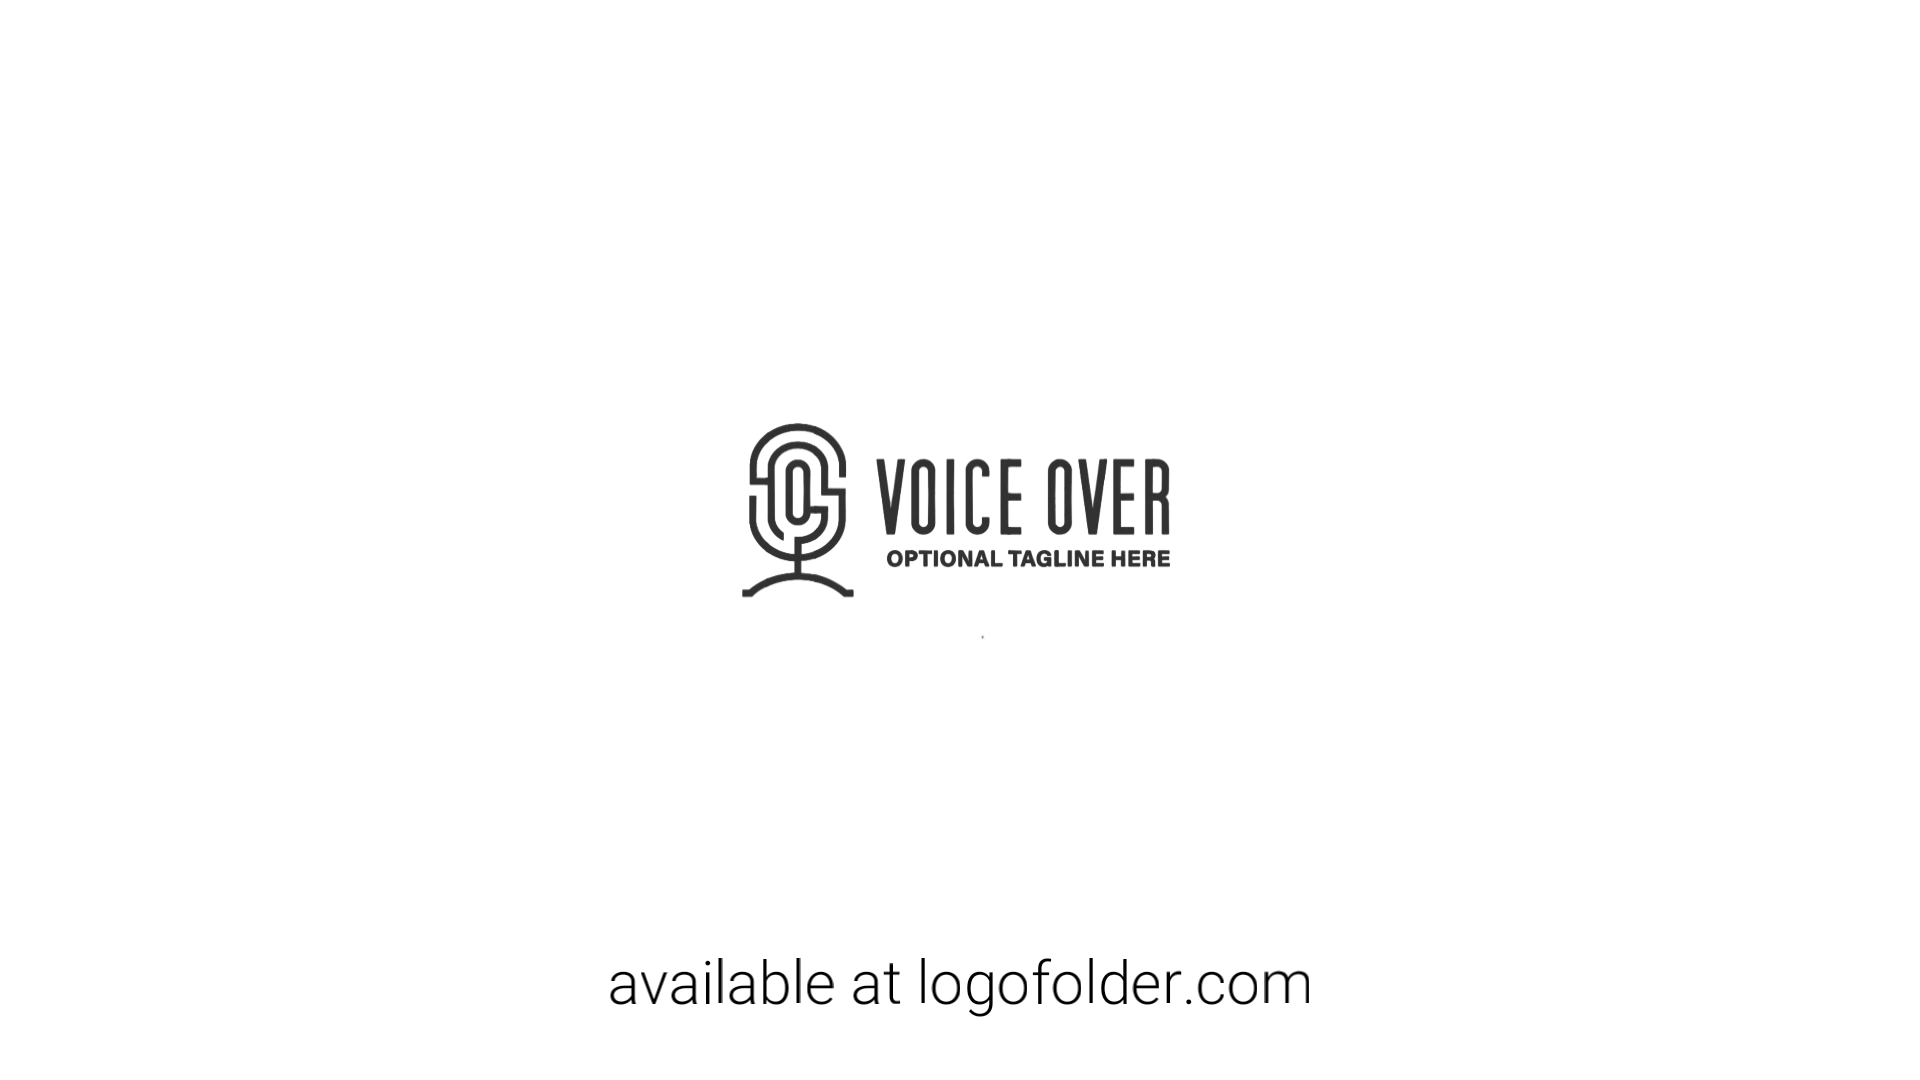 Voice Over Logo + Free Video Intro - Voice Over Logo + Free Video Intro -   10 luxe beauty Logo ideas